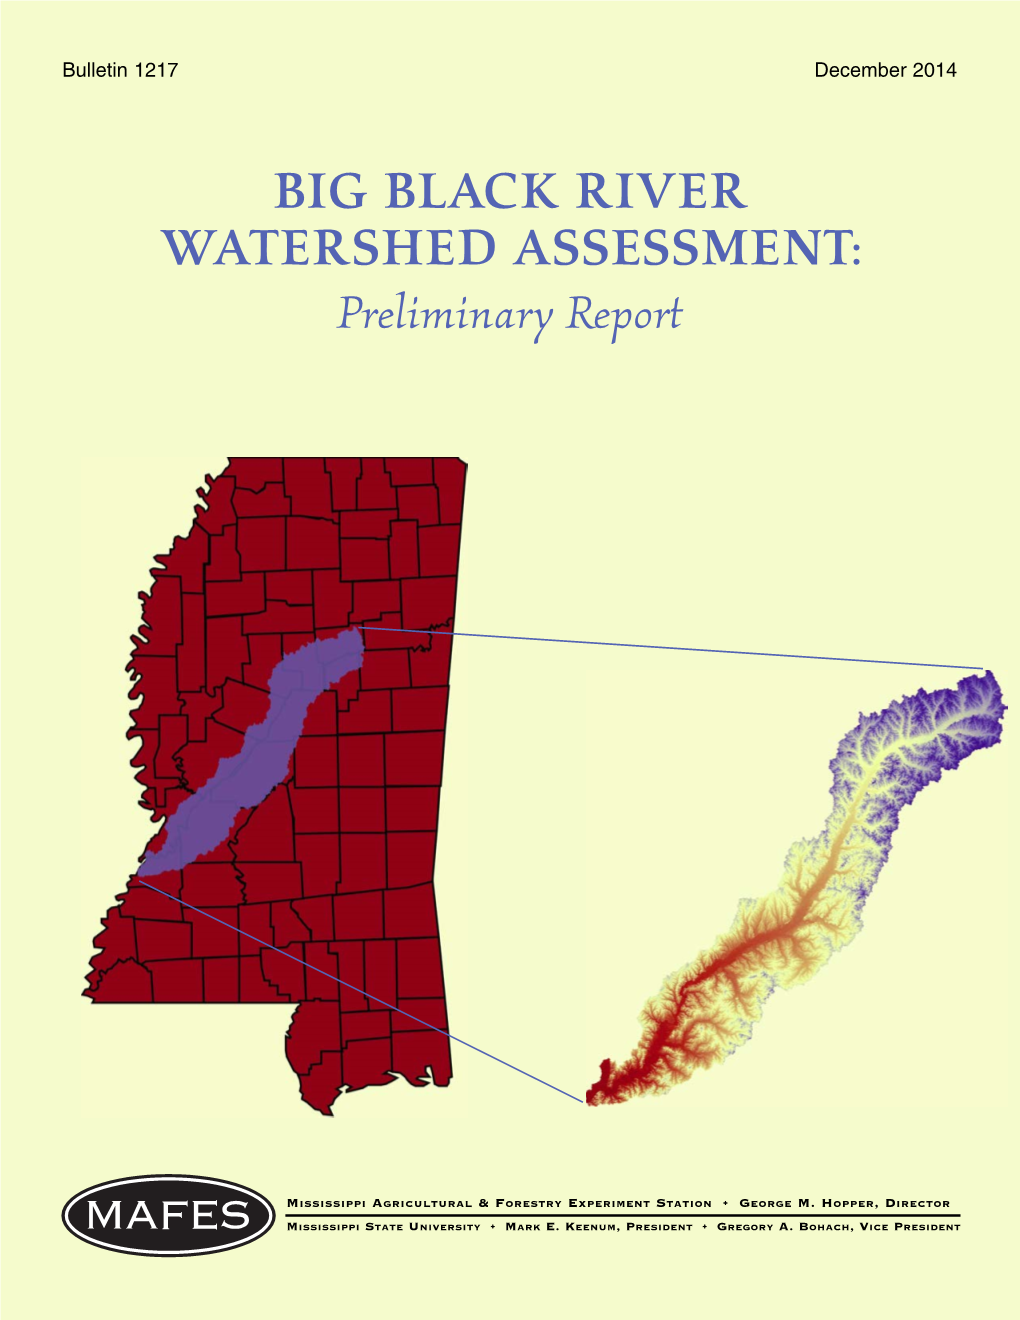 BIG BLACK RIVER WATERSHED ASSESSMENT: Preliminary Report